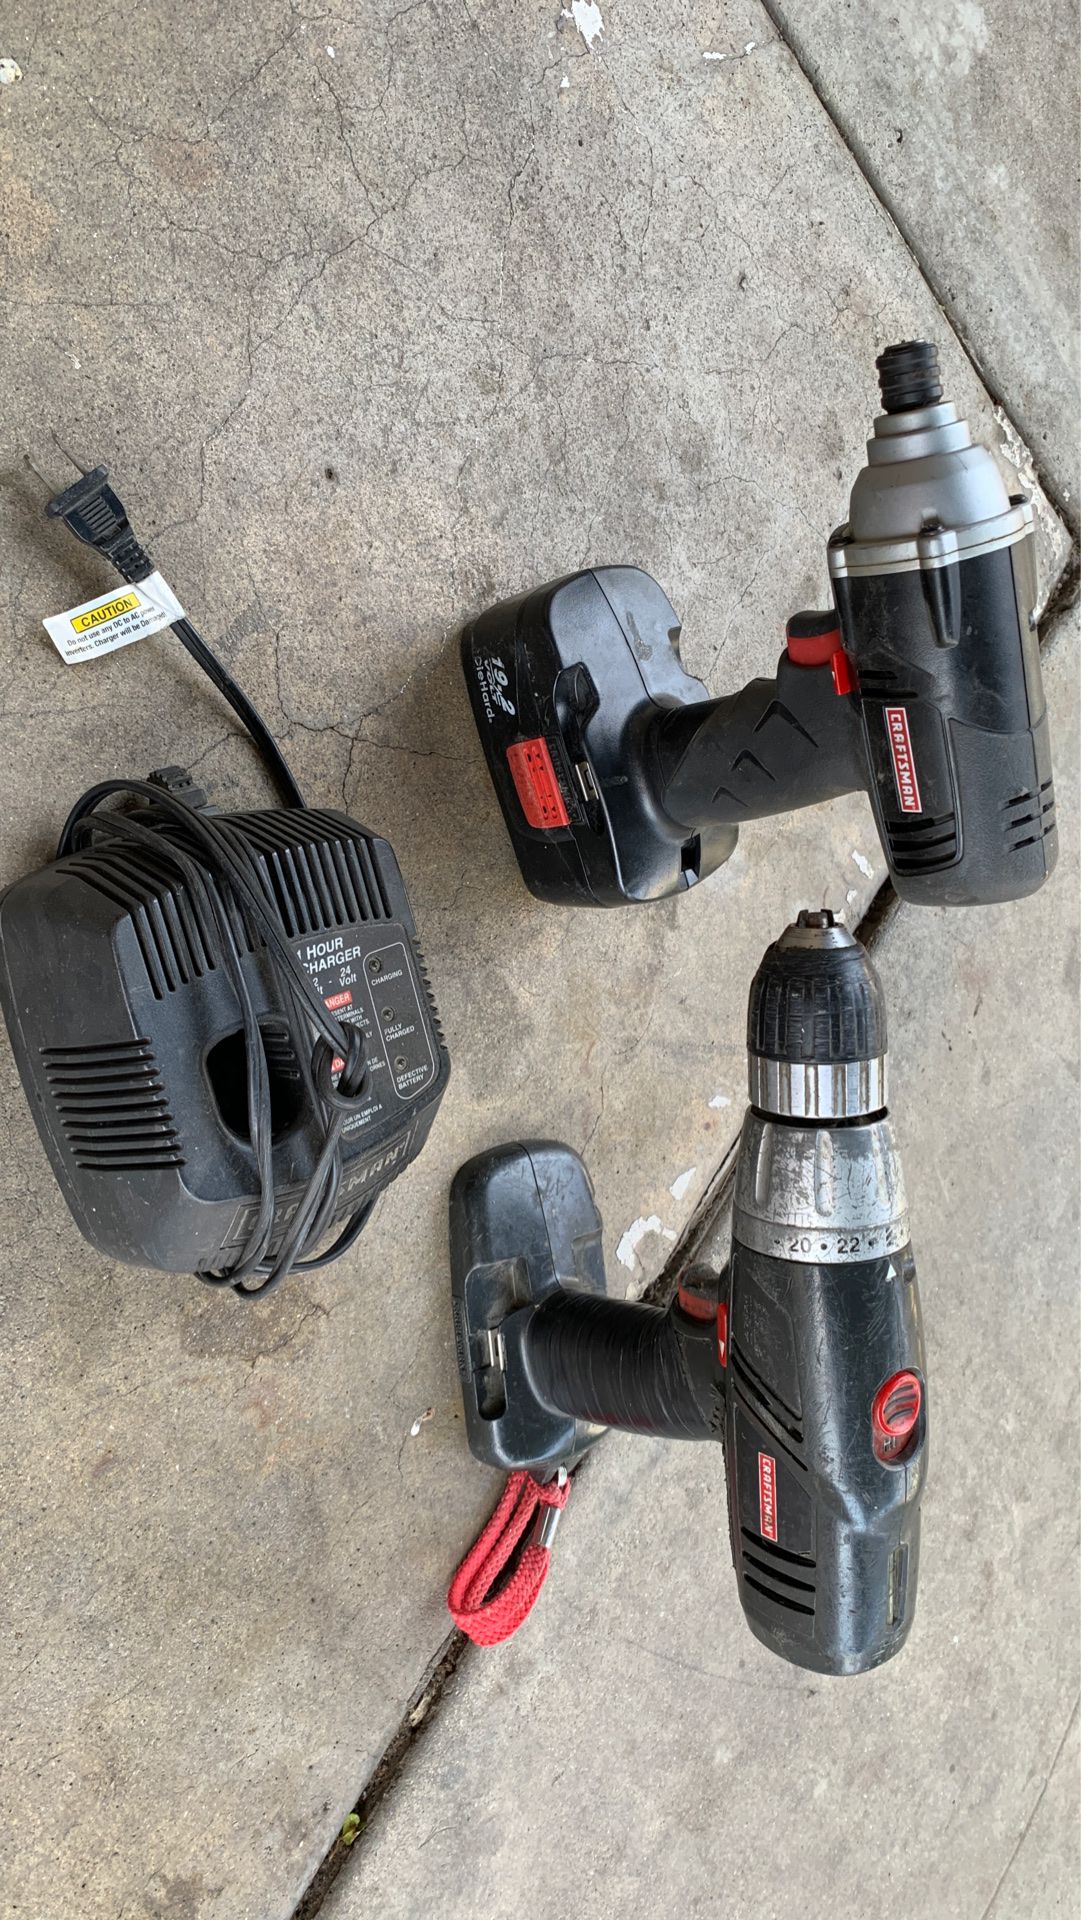 Craftsman drill and impact drill and chargers.